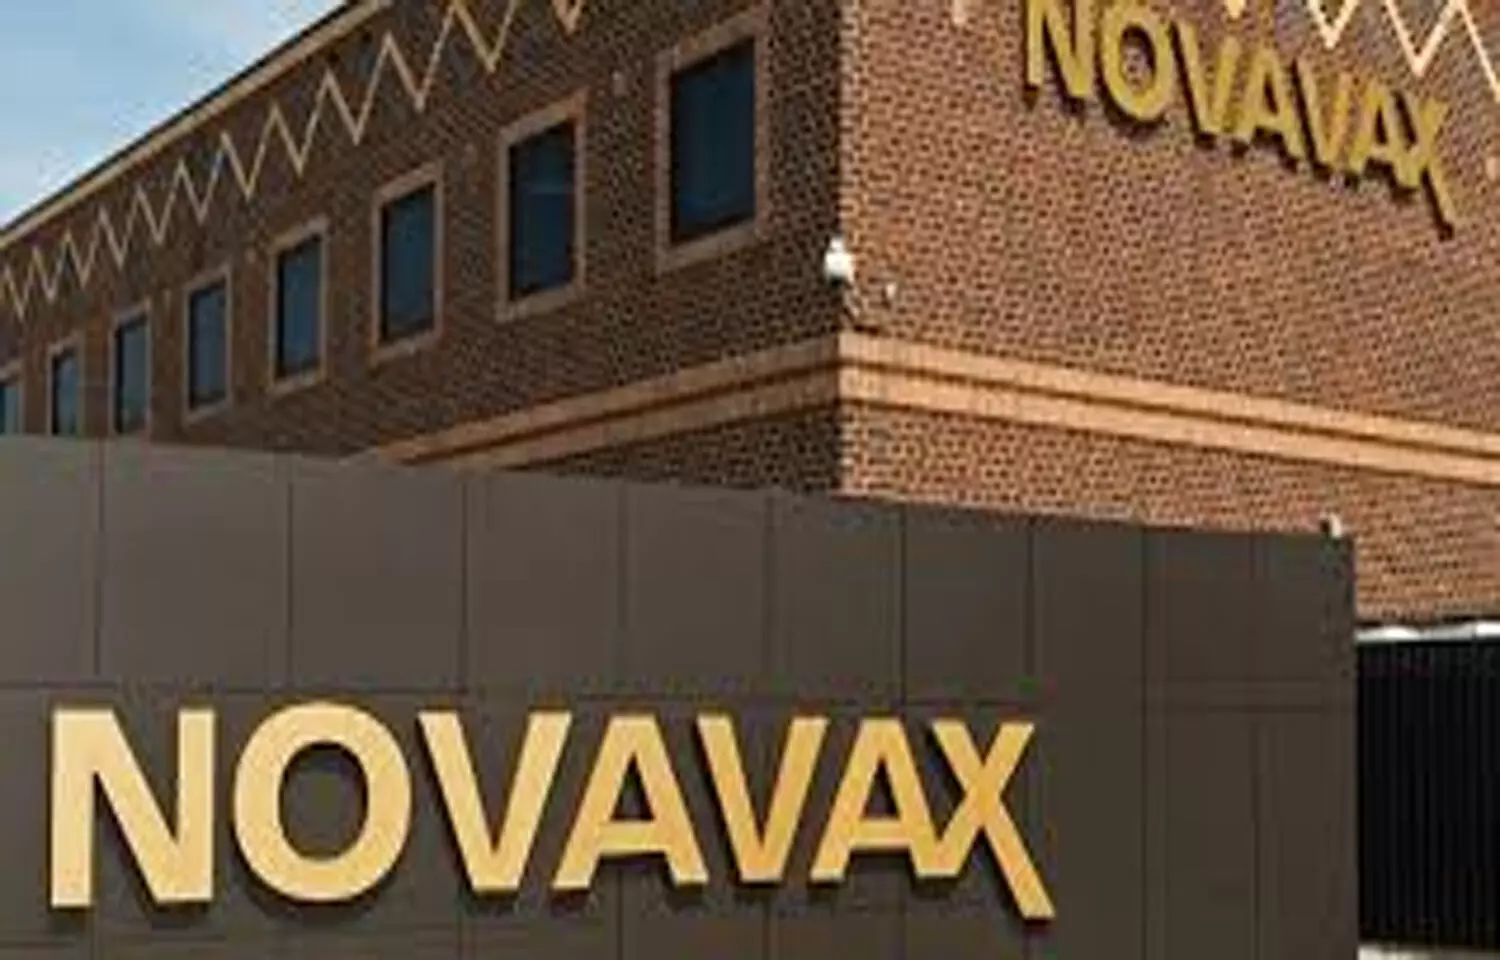 Novavax COVID vaccine Nuvaxovid recommended for expanded conditional marketing authorization in EU for adolescents